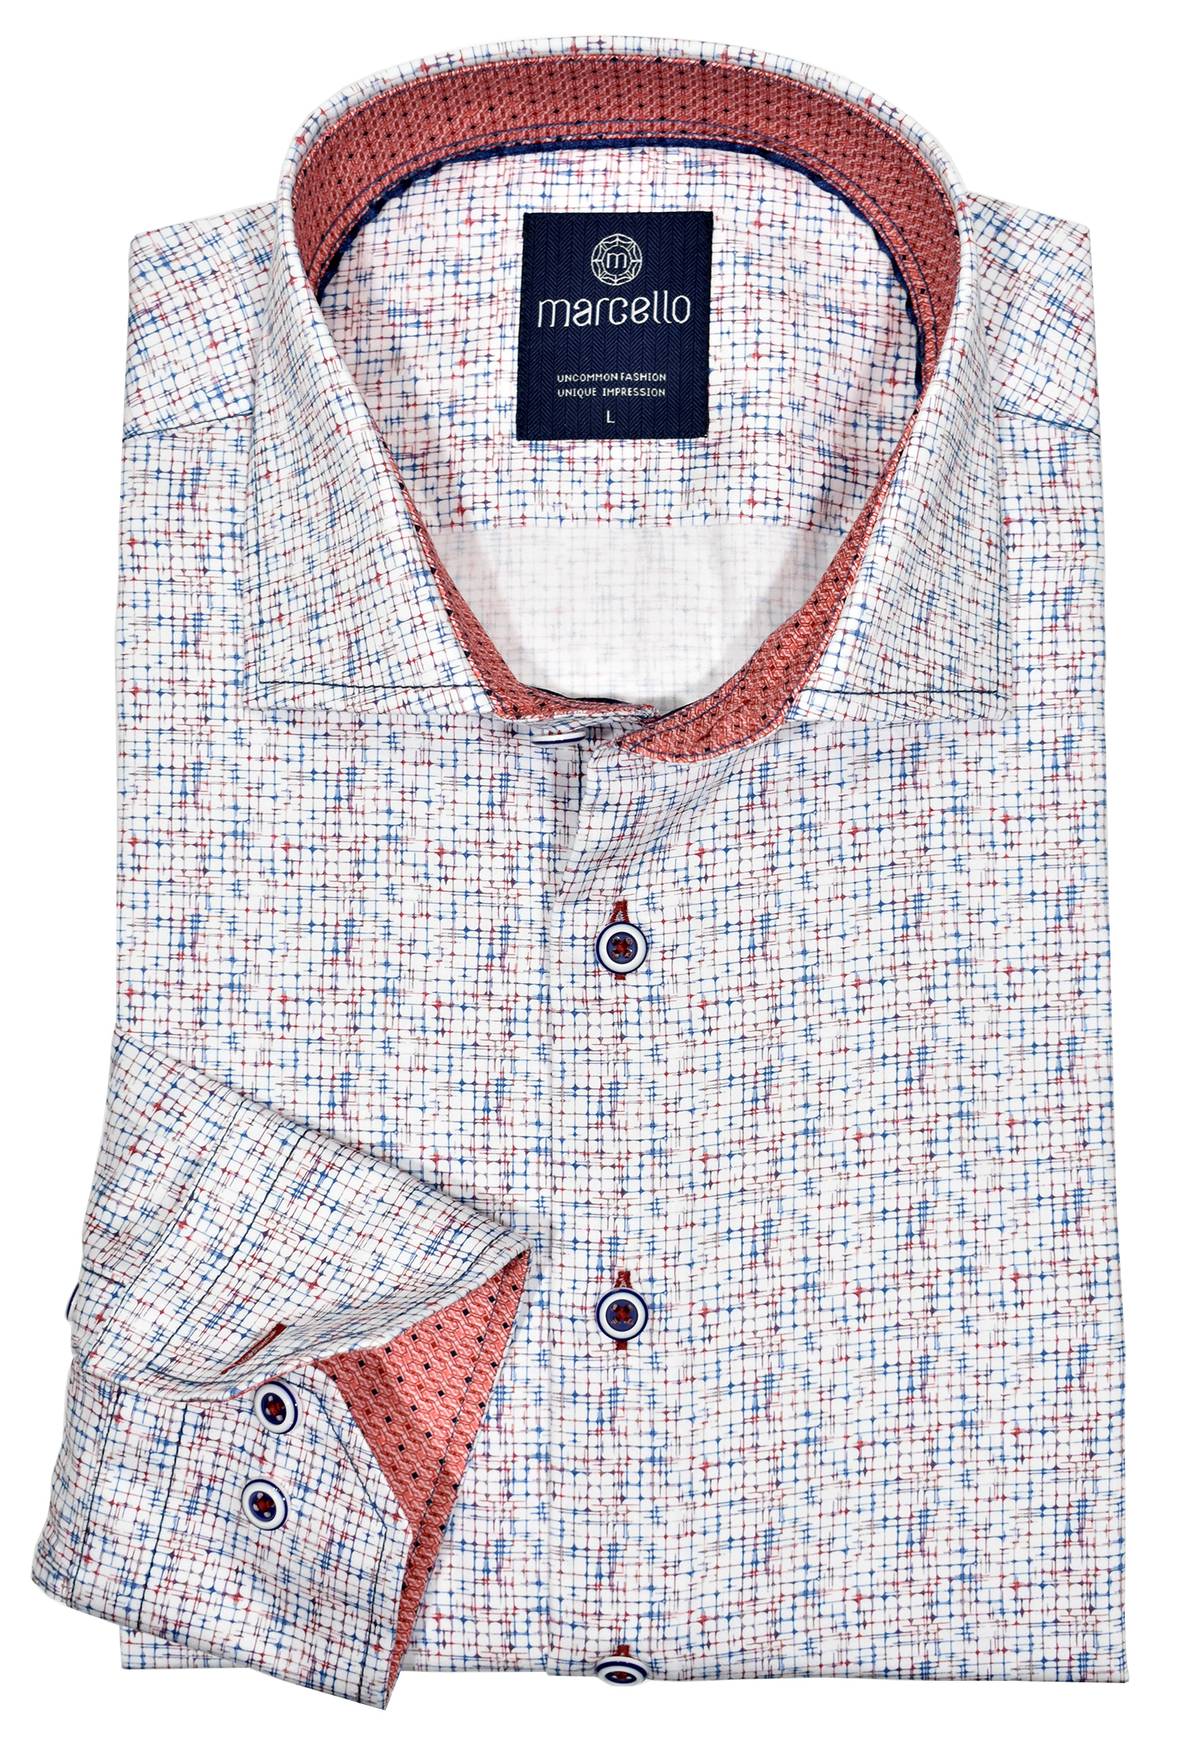 On soft cotton fabric, the abstract red and blue graduated plaid pattern with matched custom buttons and colored accent stitching depicts a cool, casual look.  This shirt is easily paired with different pants, shades of jeans and even shorts.  Matched accent red trim fabric, a medium collar.  Classic shaped fit.